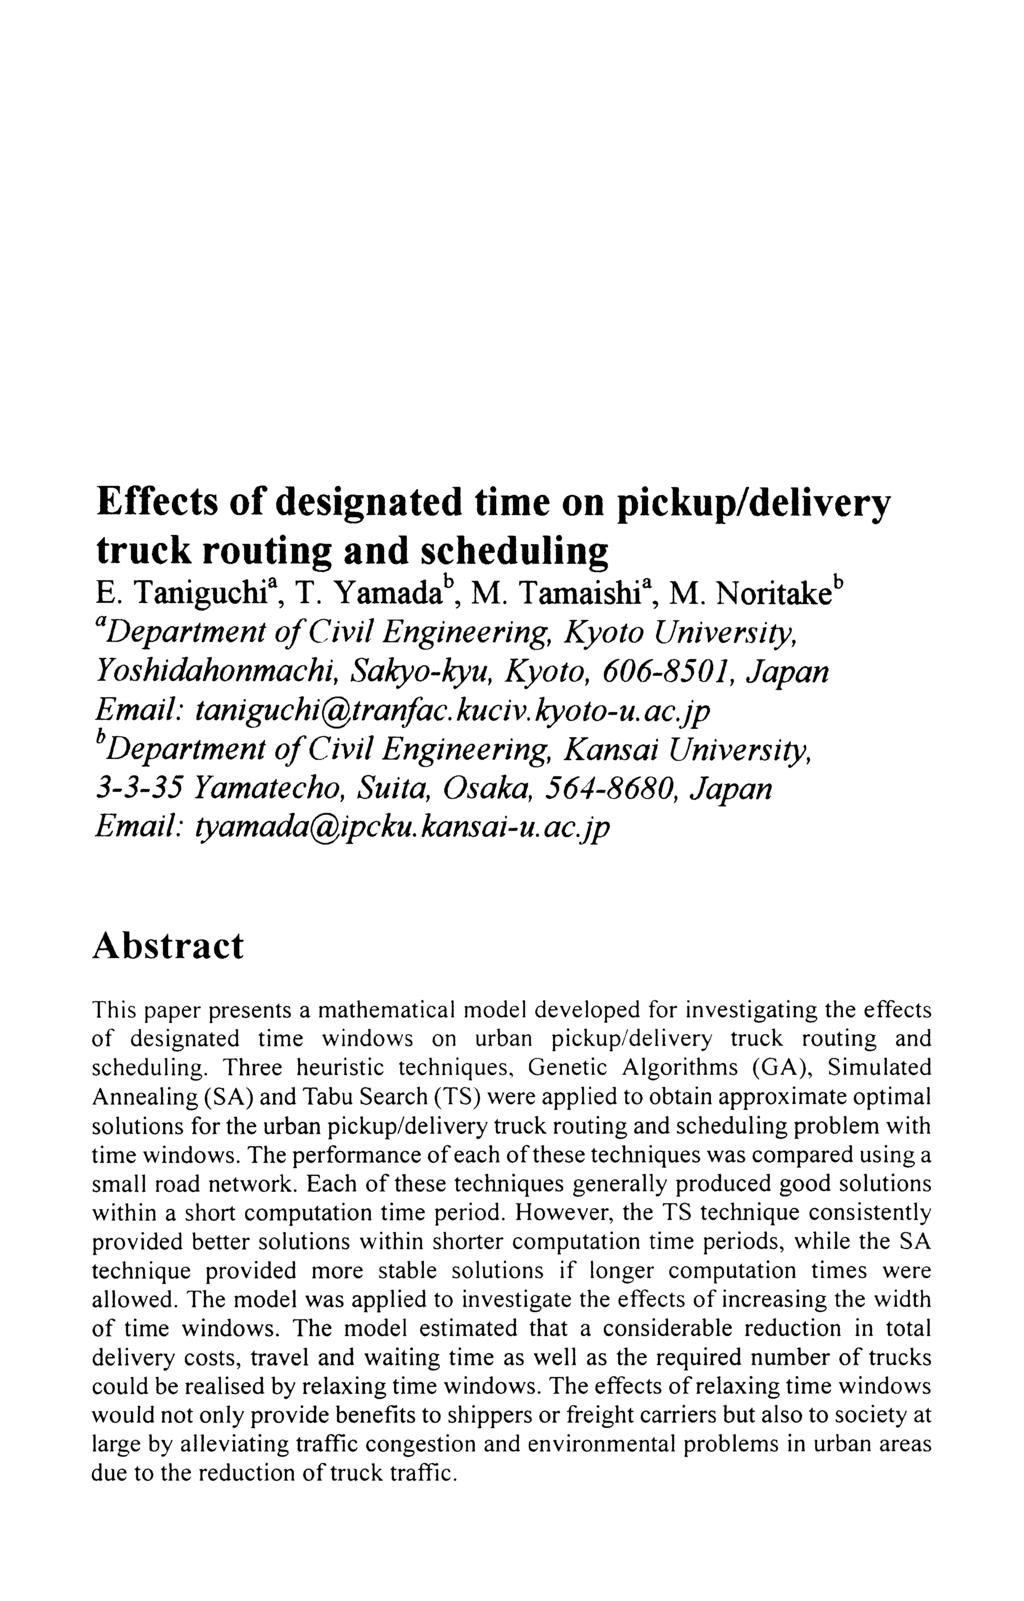 Effects of designated time on pickup/delivery truck routing and scheduling E. Taniguchf, T. Yamada\ M. Tamaishi*, M.